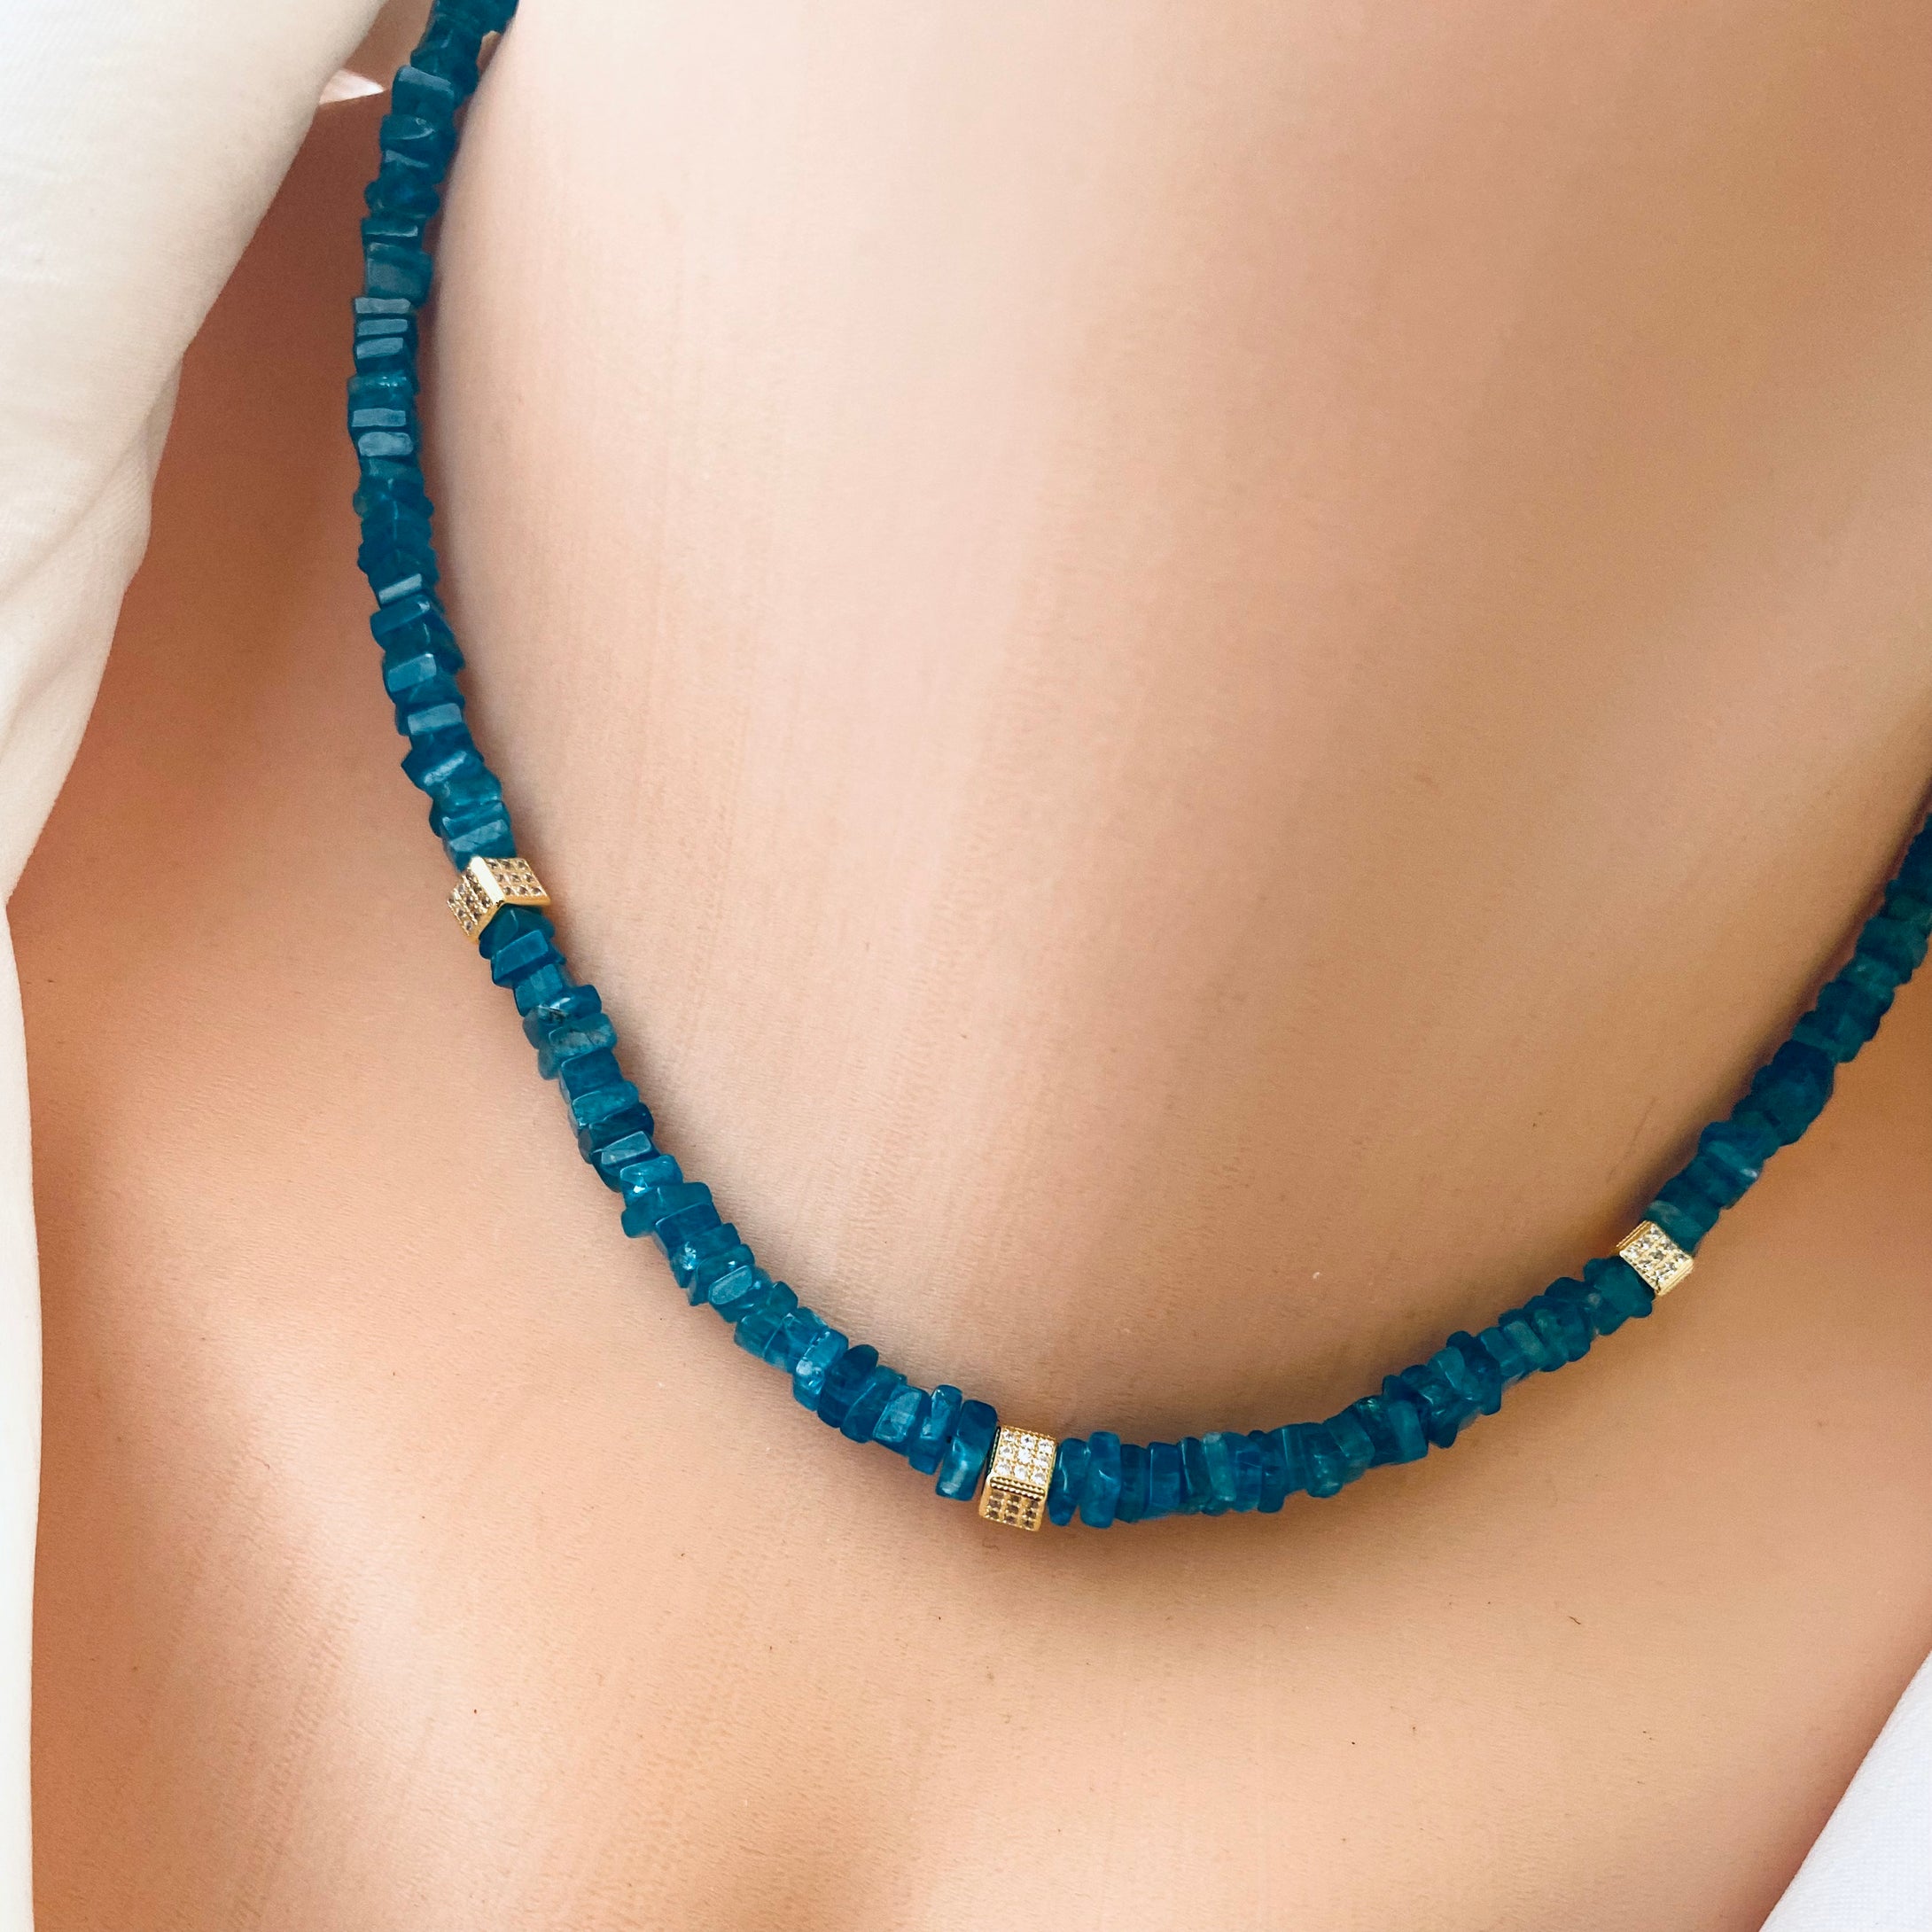 Blue Apatite Beads Choker Necklace with Gold Vermeil Details and Clasp, 15